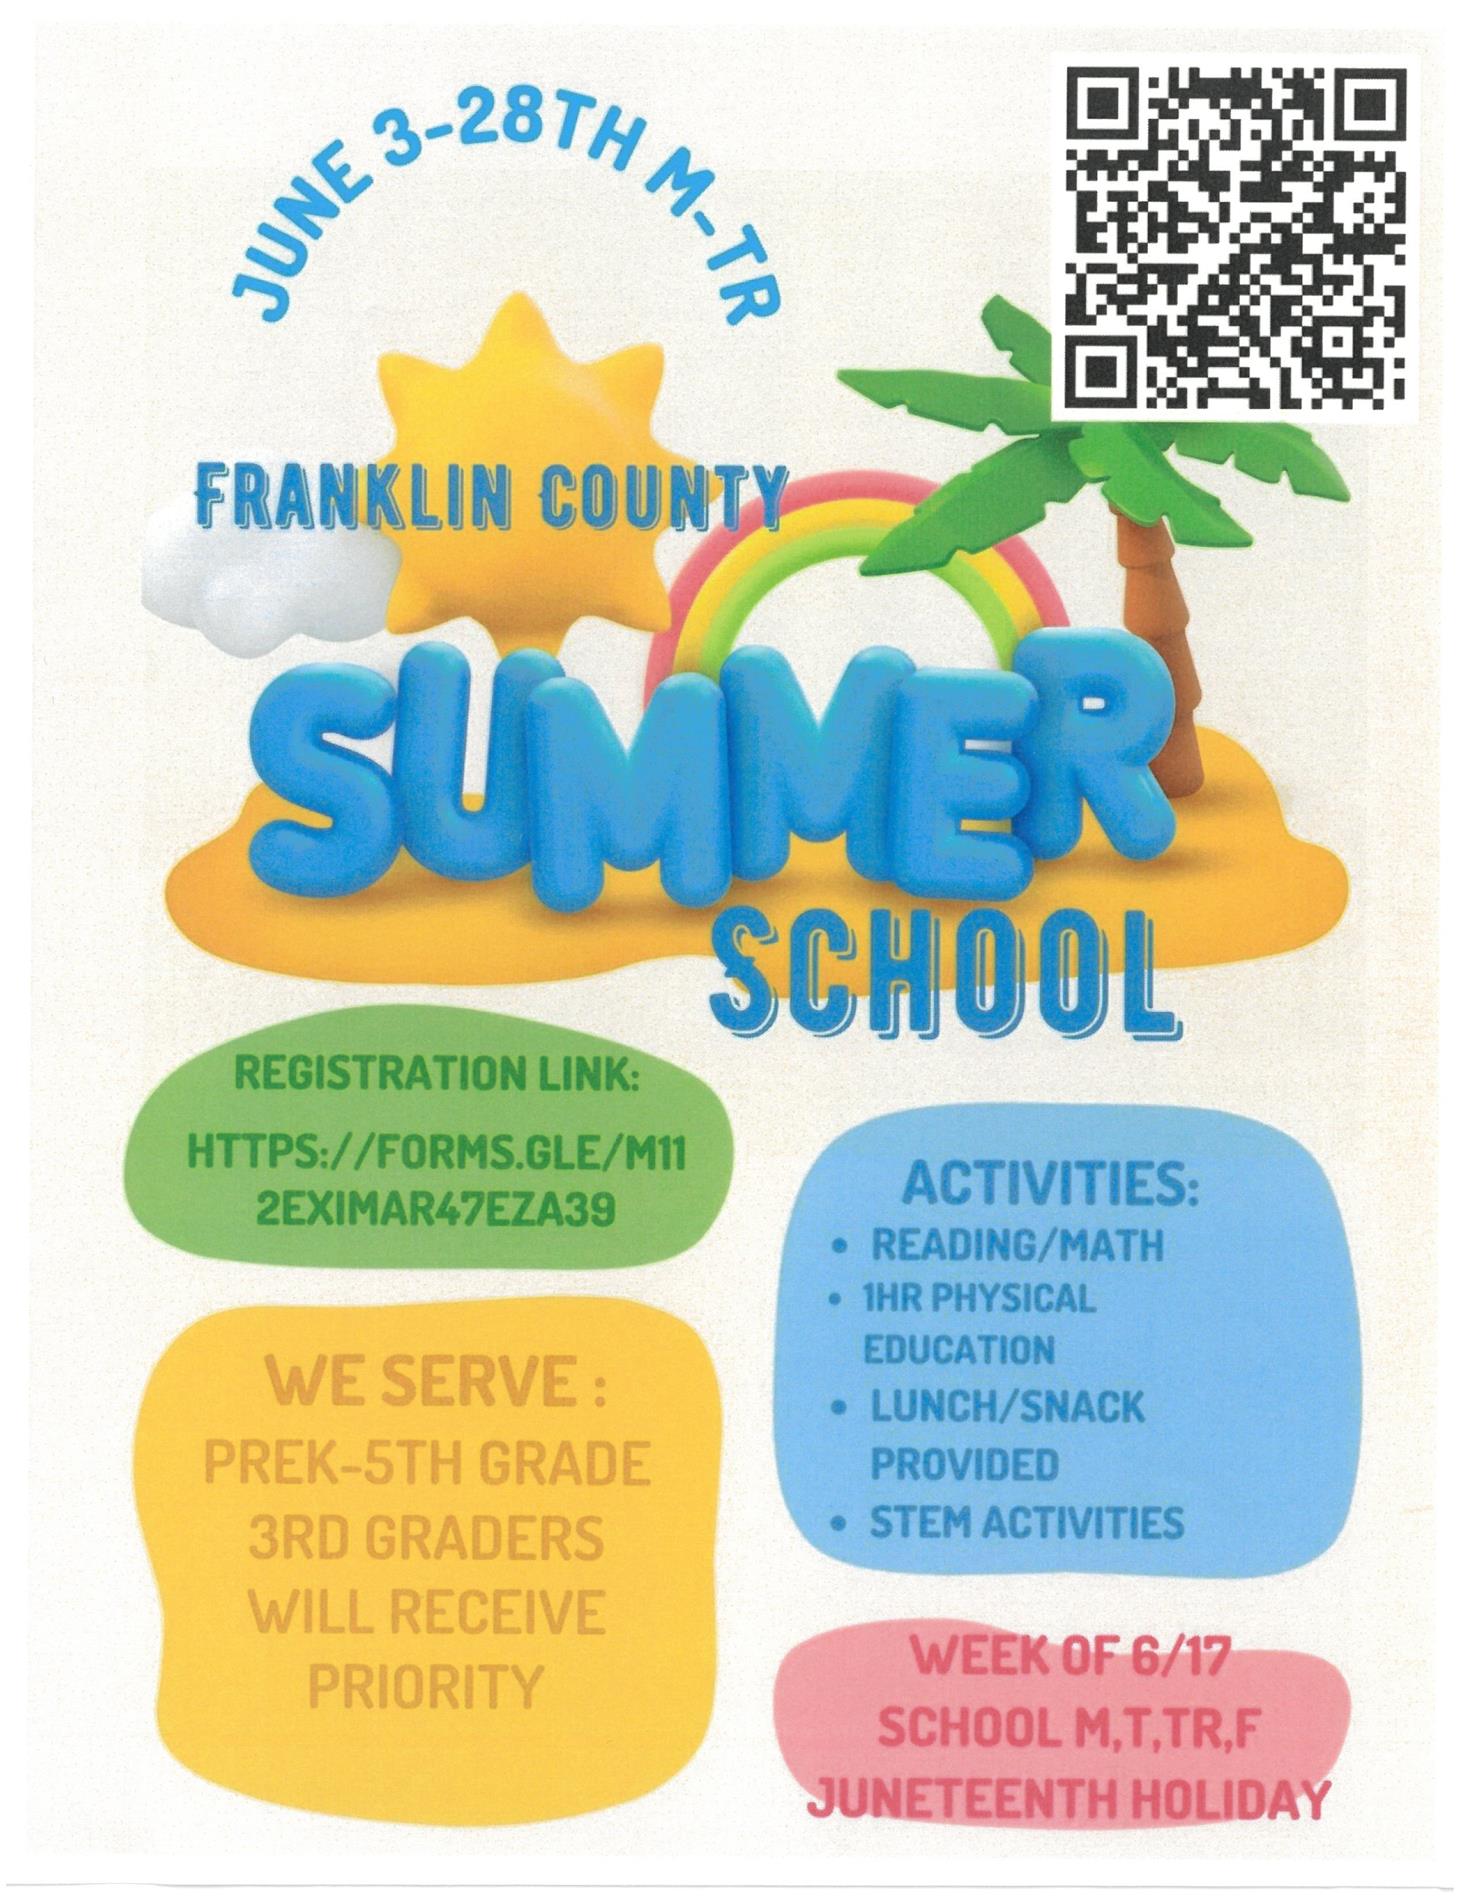 Summer camp registration is now open for franklin county school